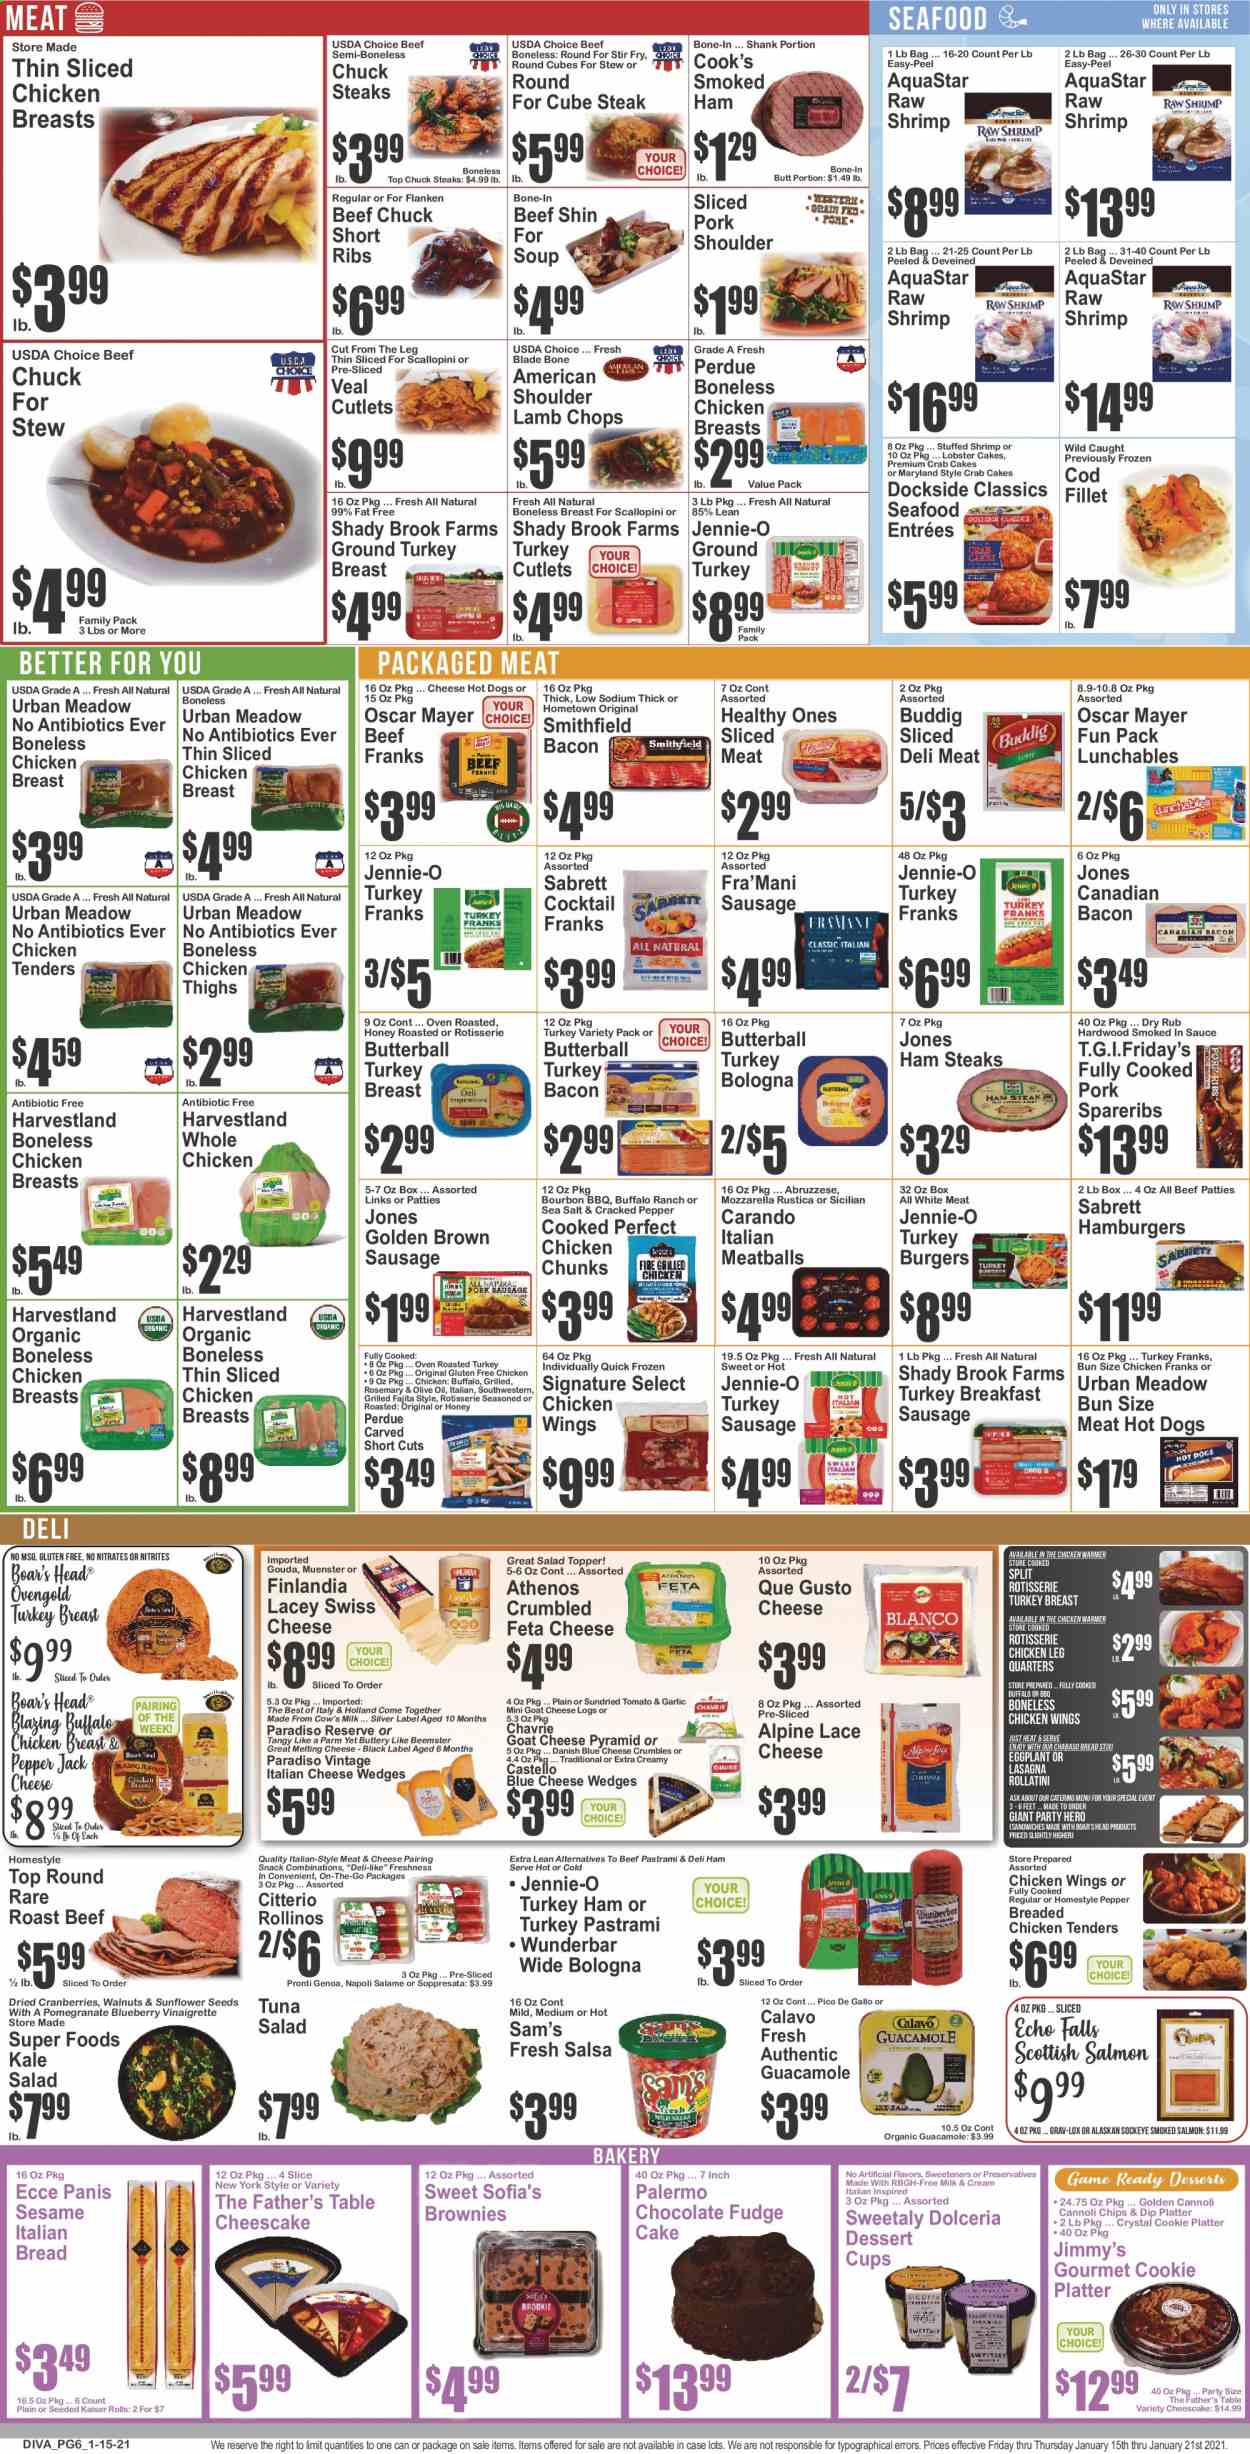 thumbnail - Key Food Flyer - 01/15/2021 - 01/21/2021 - Sales products - bread, Father's Table, brownies, danish pastry, cod, lobster, salmon, smoked salmon, tuna, seafood, shrimps, crab cake, lobster cakes, hot dog, meatballs, soup, hamburger, salad, fried chicken, fajita, Perdue®, Lunchables, bacon, canadian bacon, turkey bacon, ham, ham steaks, smoked ham, bologna sausage, Oscar Mayer, sausage, chicken frankfurters, guacamole, tuna salad, blue cheese, goat cheese, gouda, mozzarella, swiss cheese, Pepper Jack cheese, Münster cheese, feta, cheese crumbles, milk, salsa, dip, eggplant, chicken wings, fudge, chocolate, snack, rosemary, vinaigrette dressing, olive oil, honey, dried tomatoes, walnuts, dried fruit, Cook's, bourbon, bourbon whiskey, Butterball, ground turkey, turkey breast, whole chicken, chicken breasts, chicken tenders, chicken thighs, beef meat, veal cutlet, veal meat, pastrami, steak, roast beef, sausage meat, pork meat, pork shoulder, pork spare ribs, lamb chops, lamb meat, cup. Page 6.